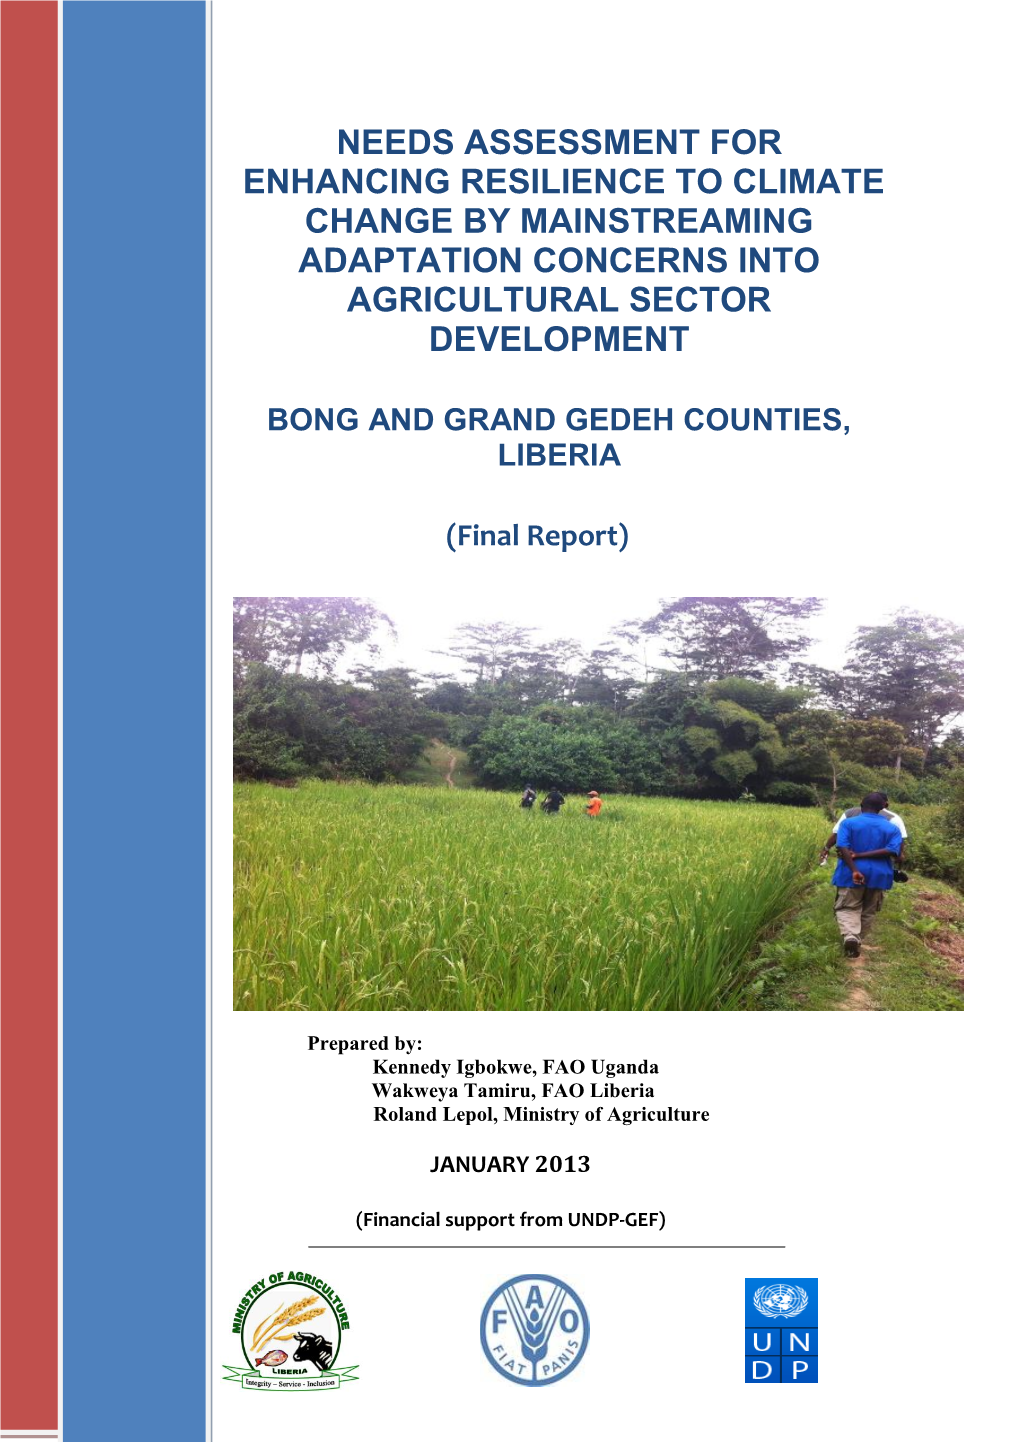 BONG and GRAND GEDEH COUNTIES, LIBERIA (Final Report)